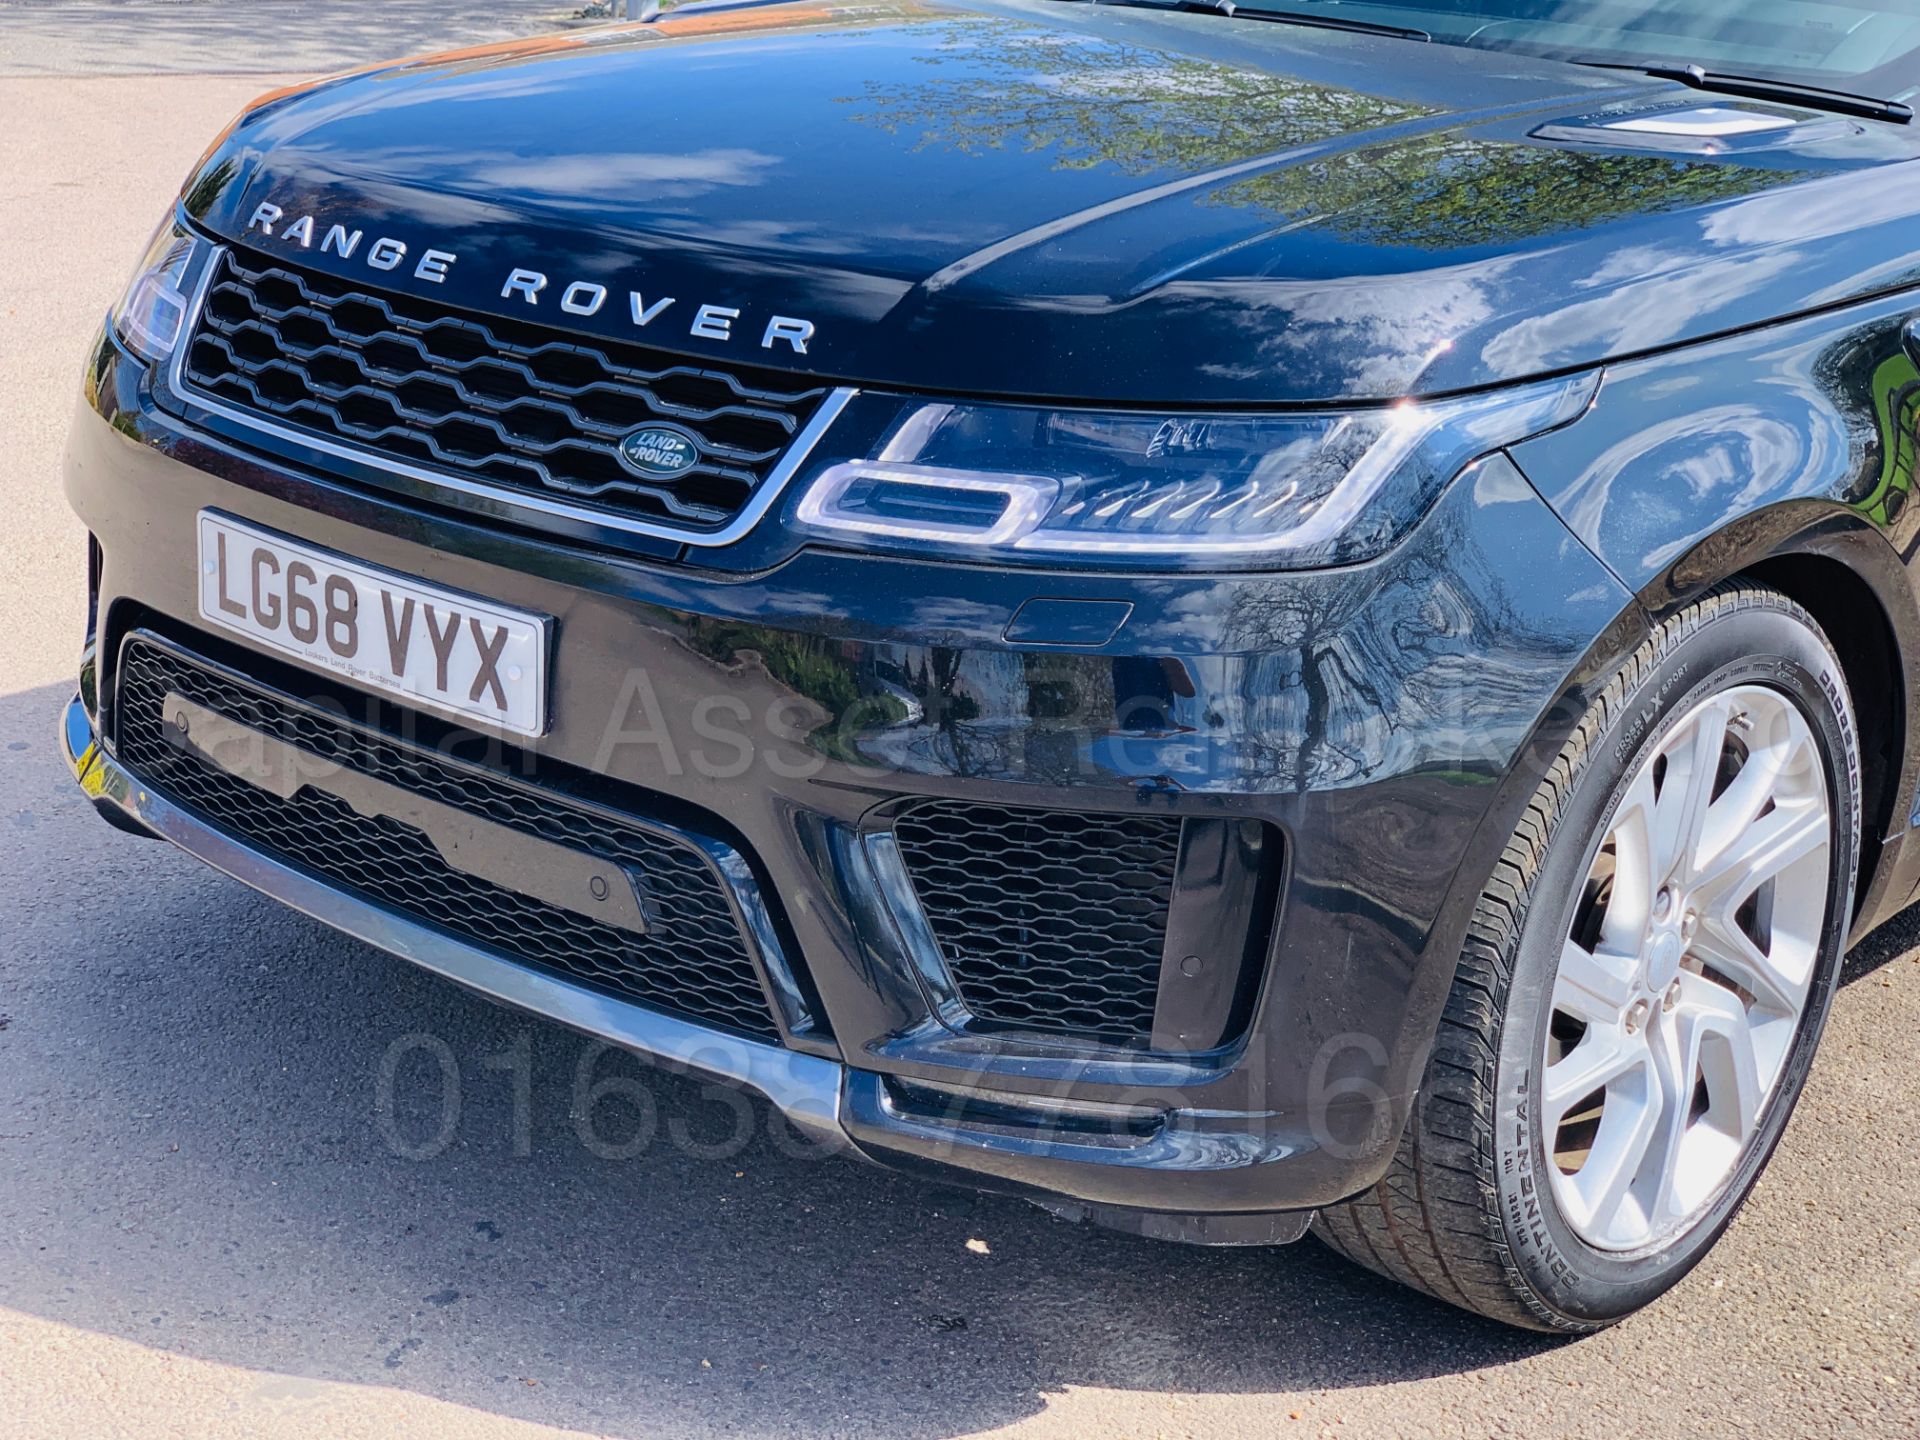 (ON SALE) RANGE ROVER SPORT *HSE* (2019 - ALL NEW MODEL) '3.0 SDV6 - 306 BHP - 8 SPEED AUTO' - Image 14 of 73